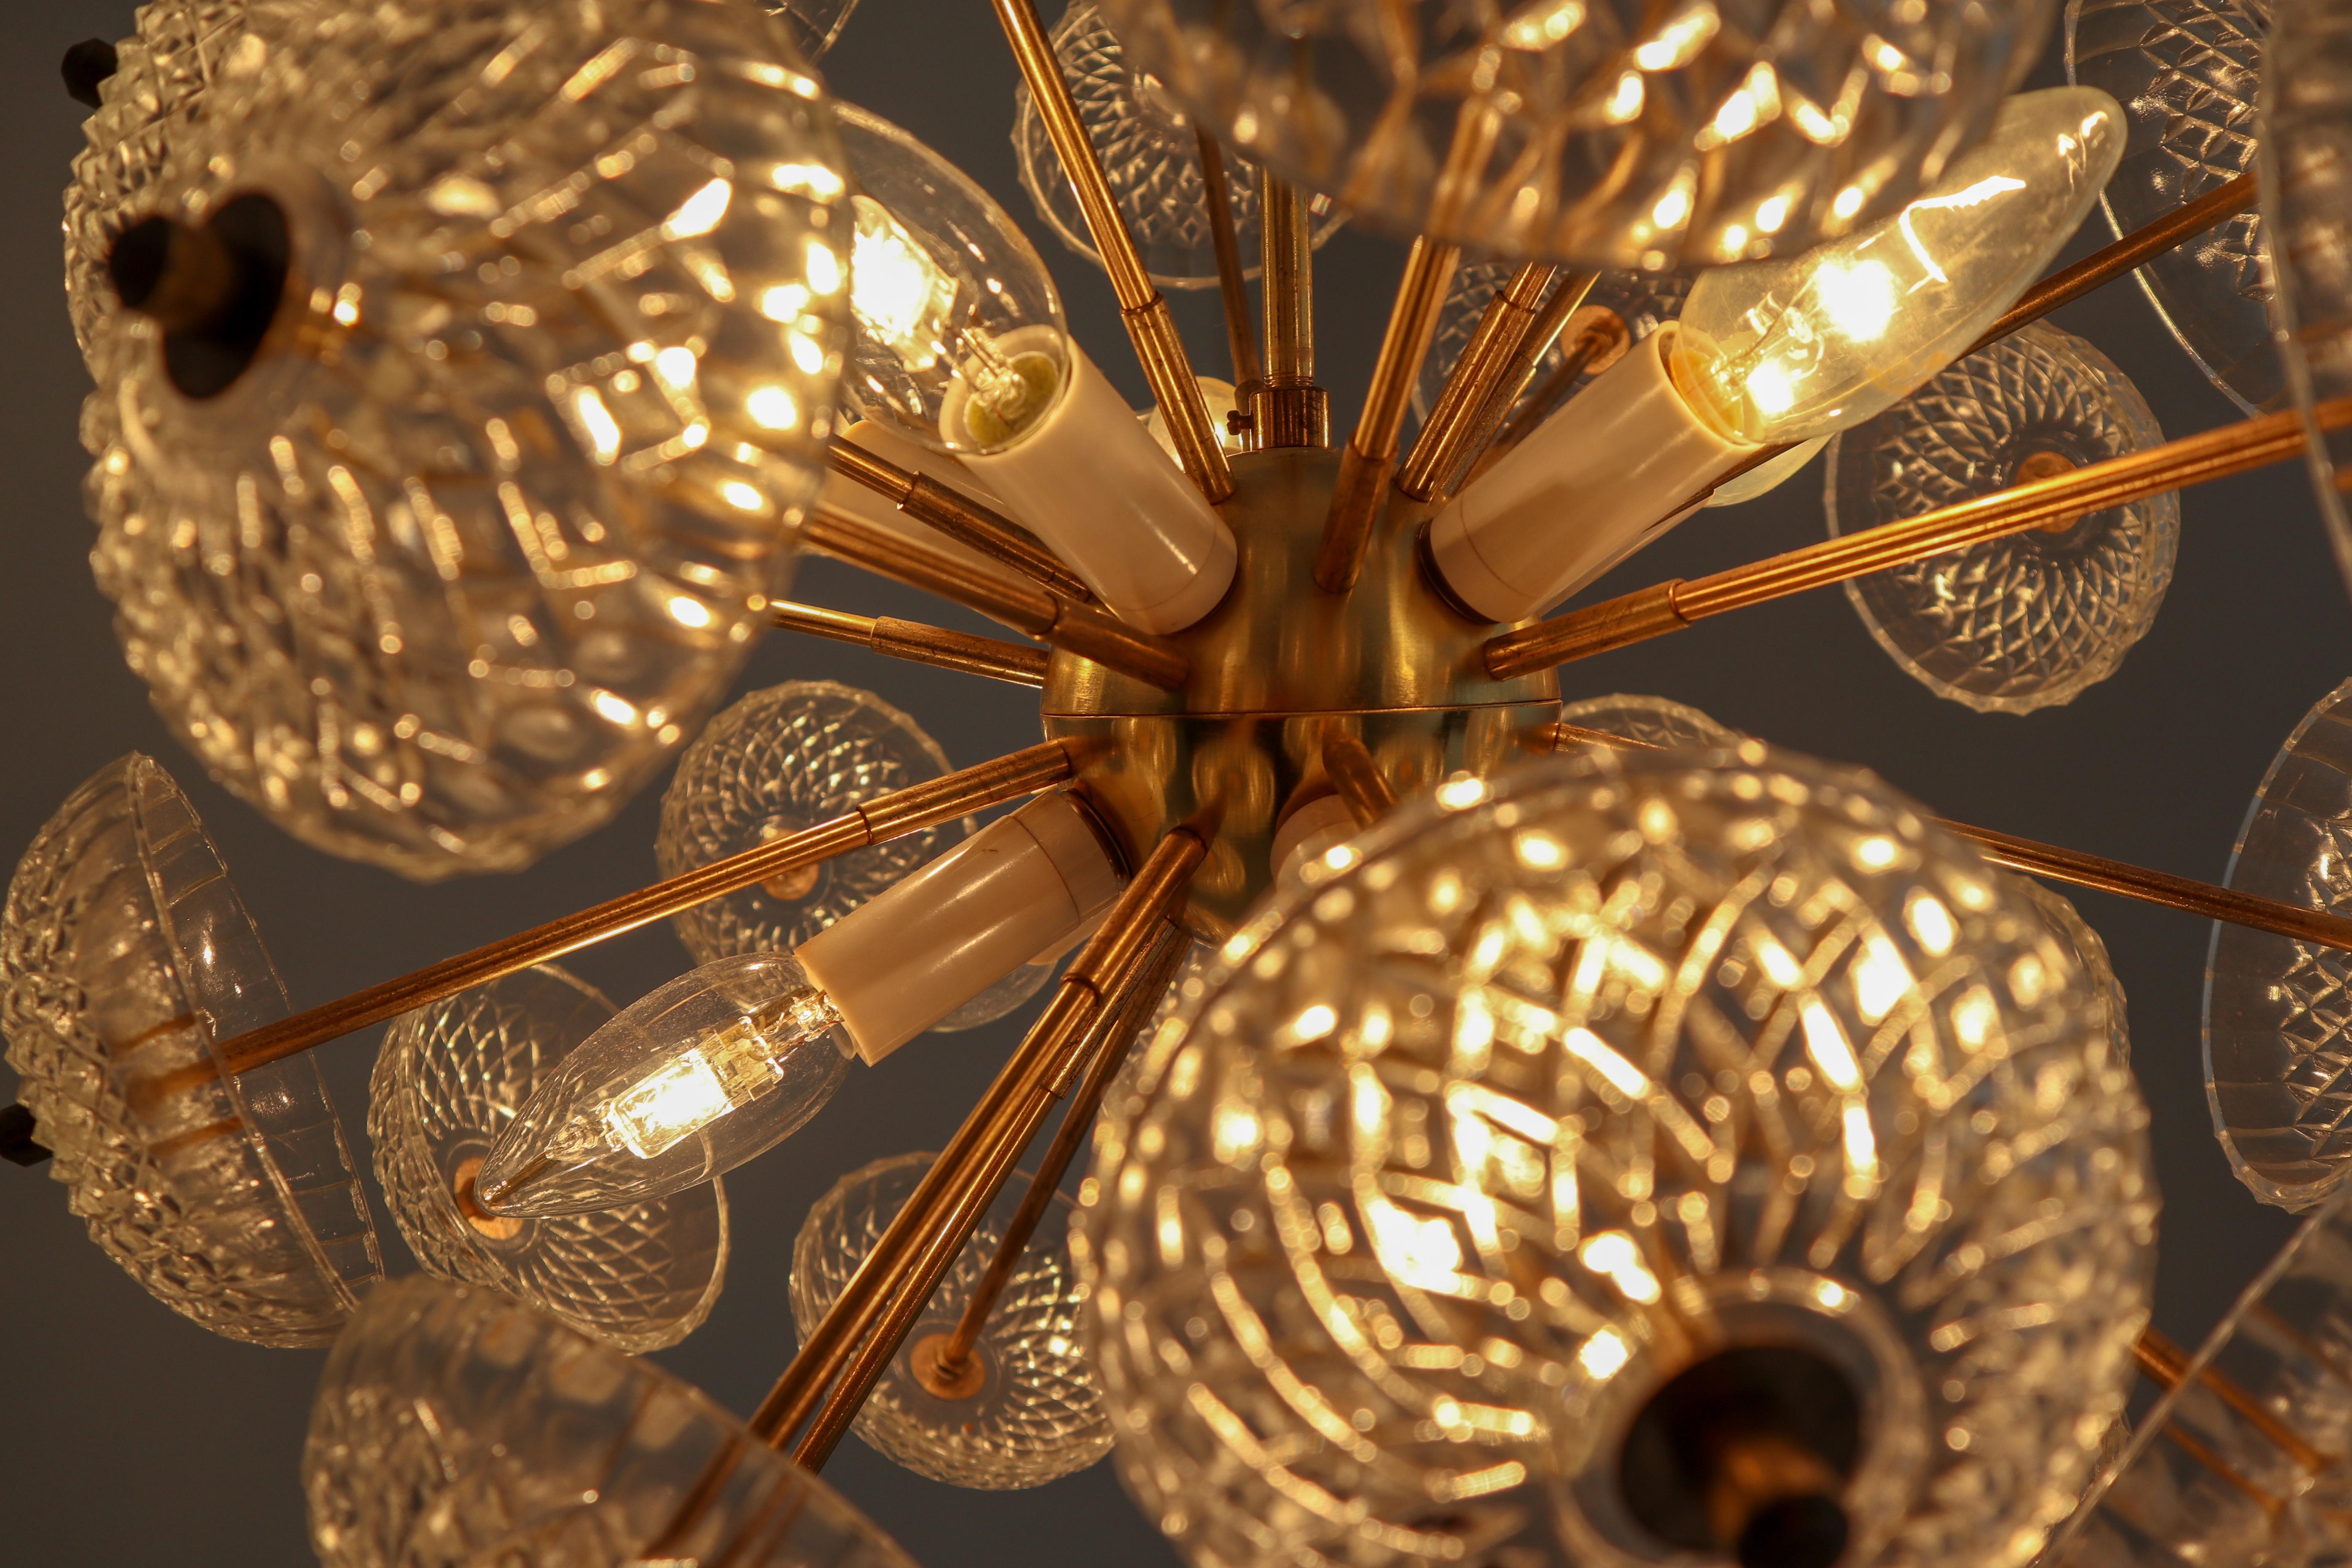 European Midcentury Brass Floral Chandeliers in the Style of Emil Stejnar, Europe, 1960s For Sale